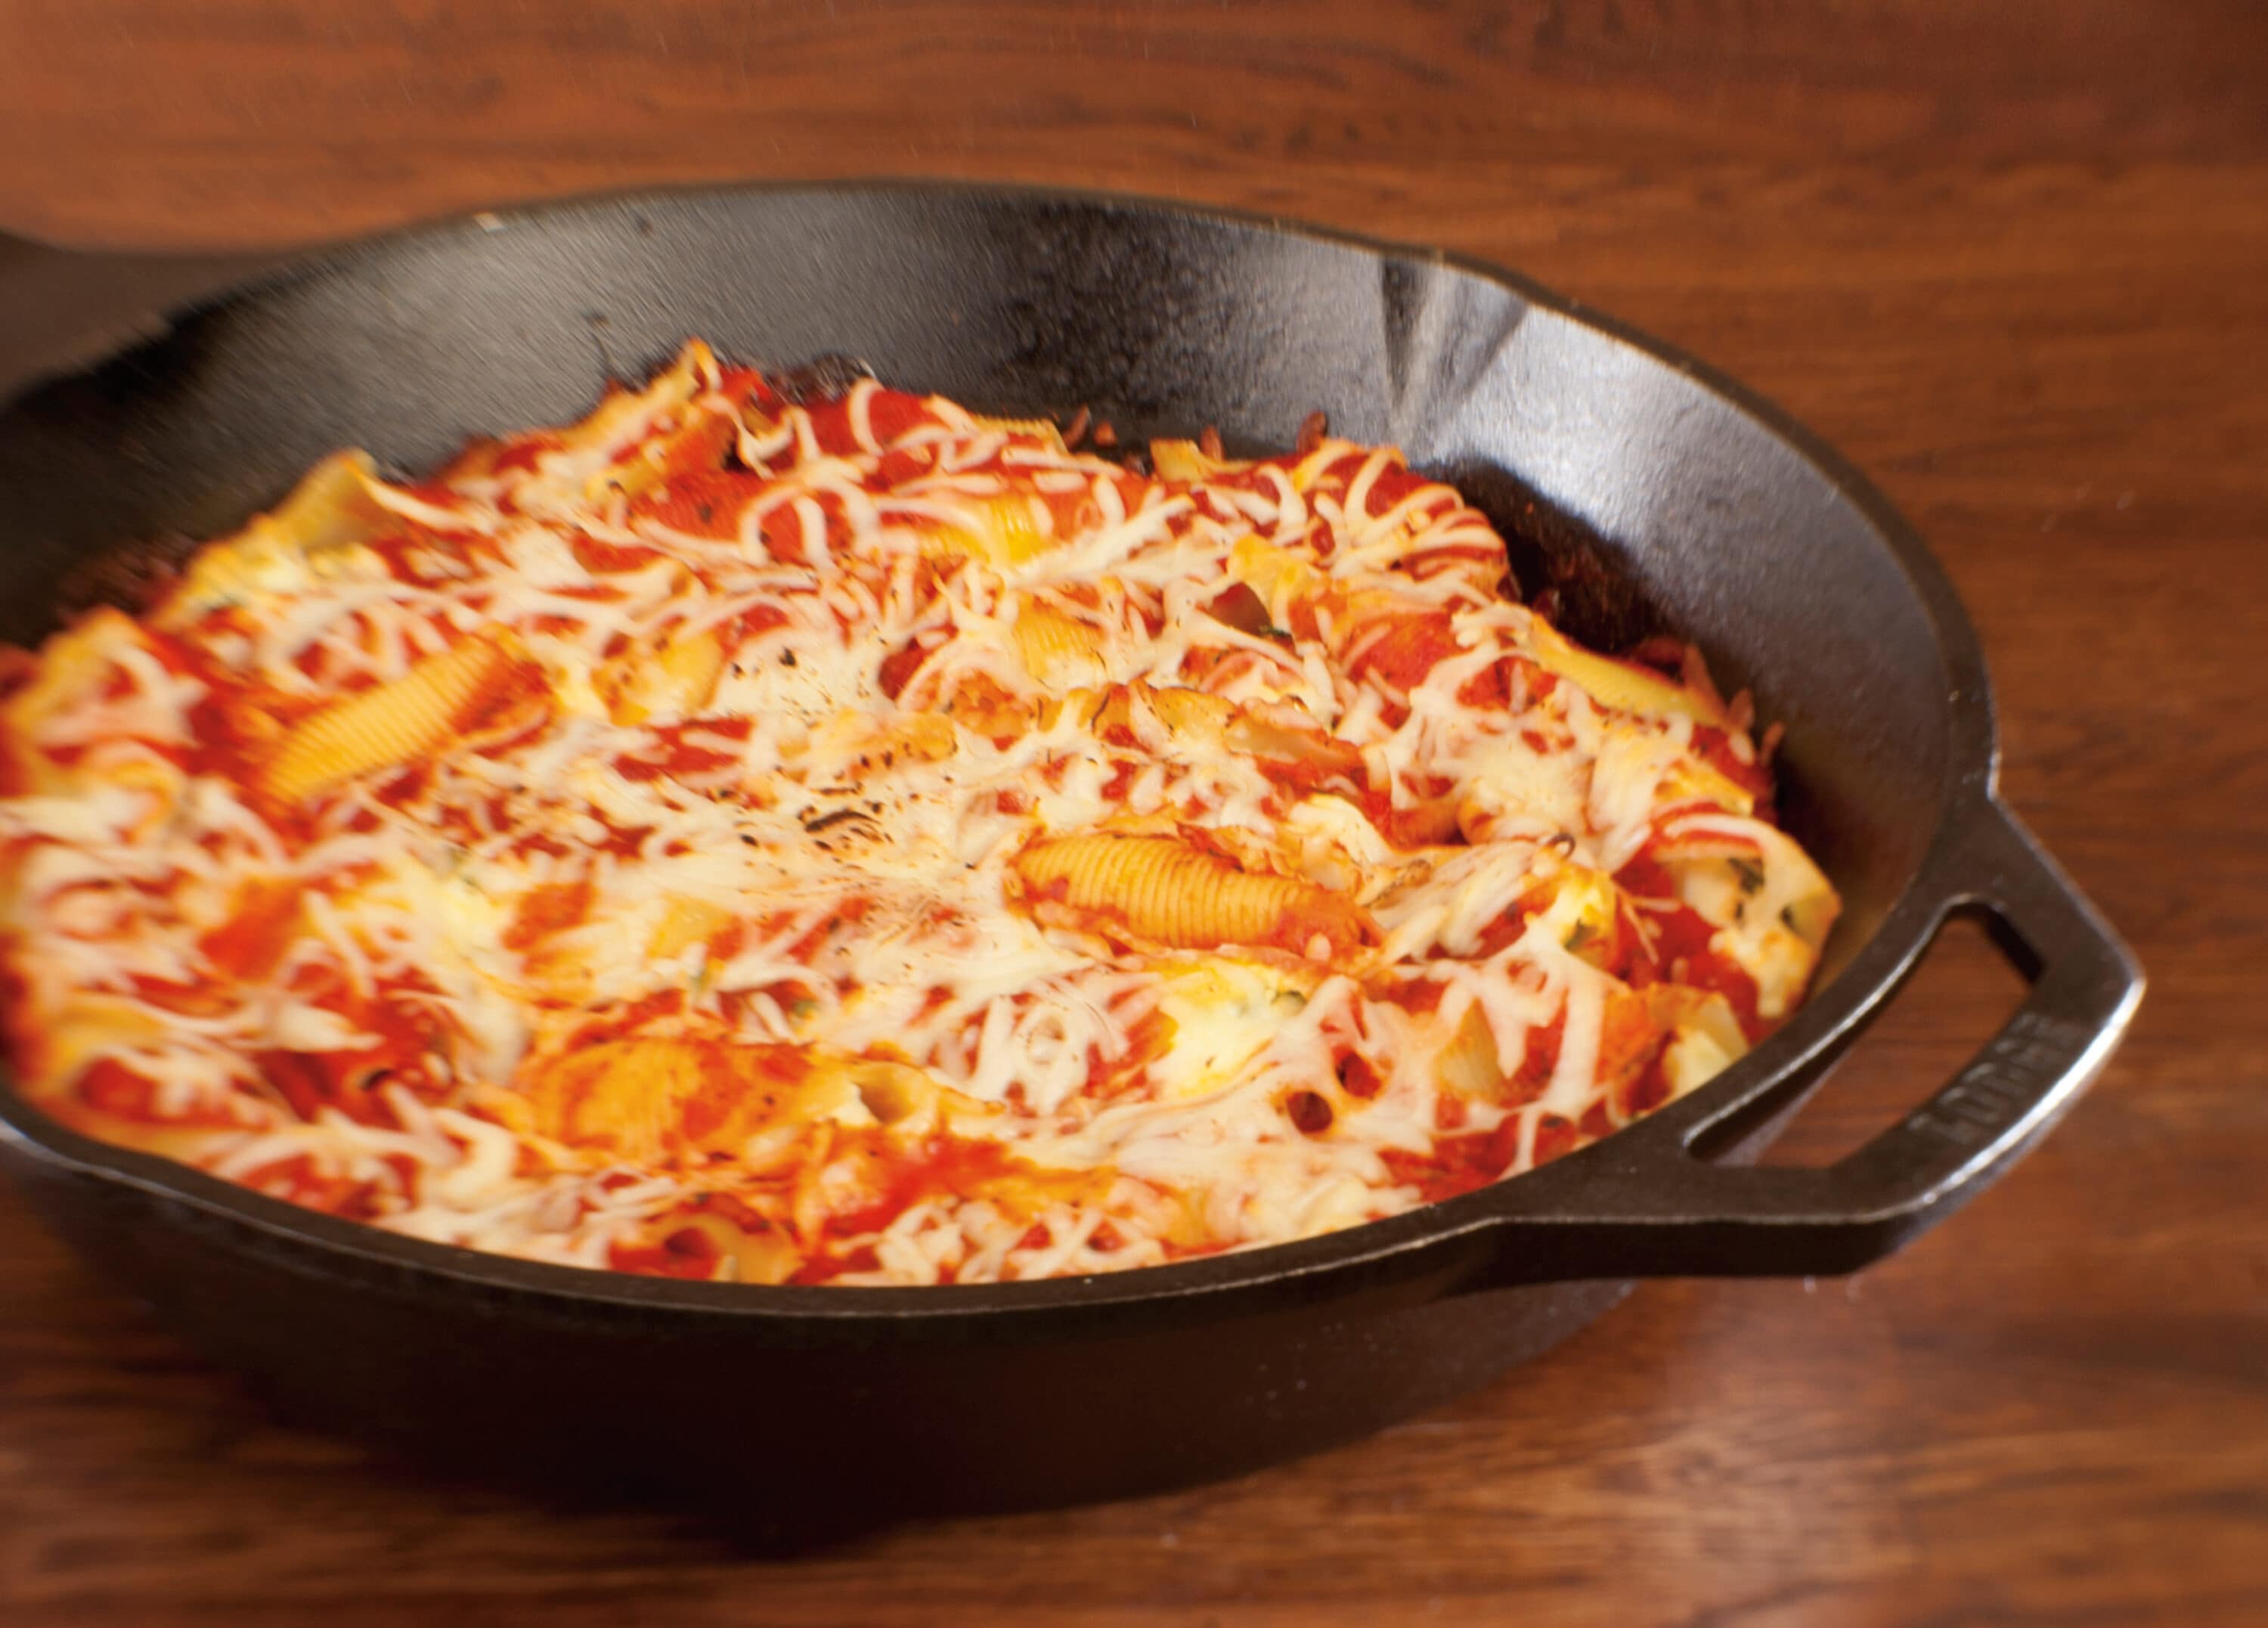  Lodge Cast Iron 13.25-Inch Skillet : Sports & Outdoors